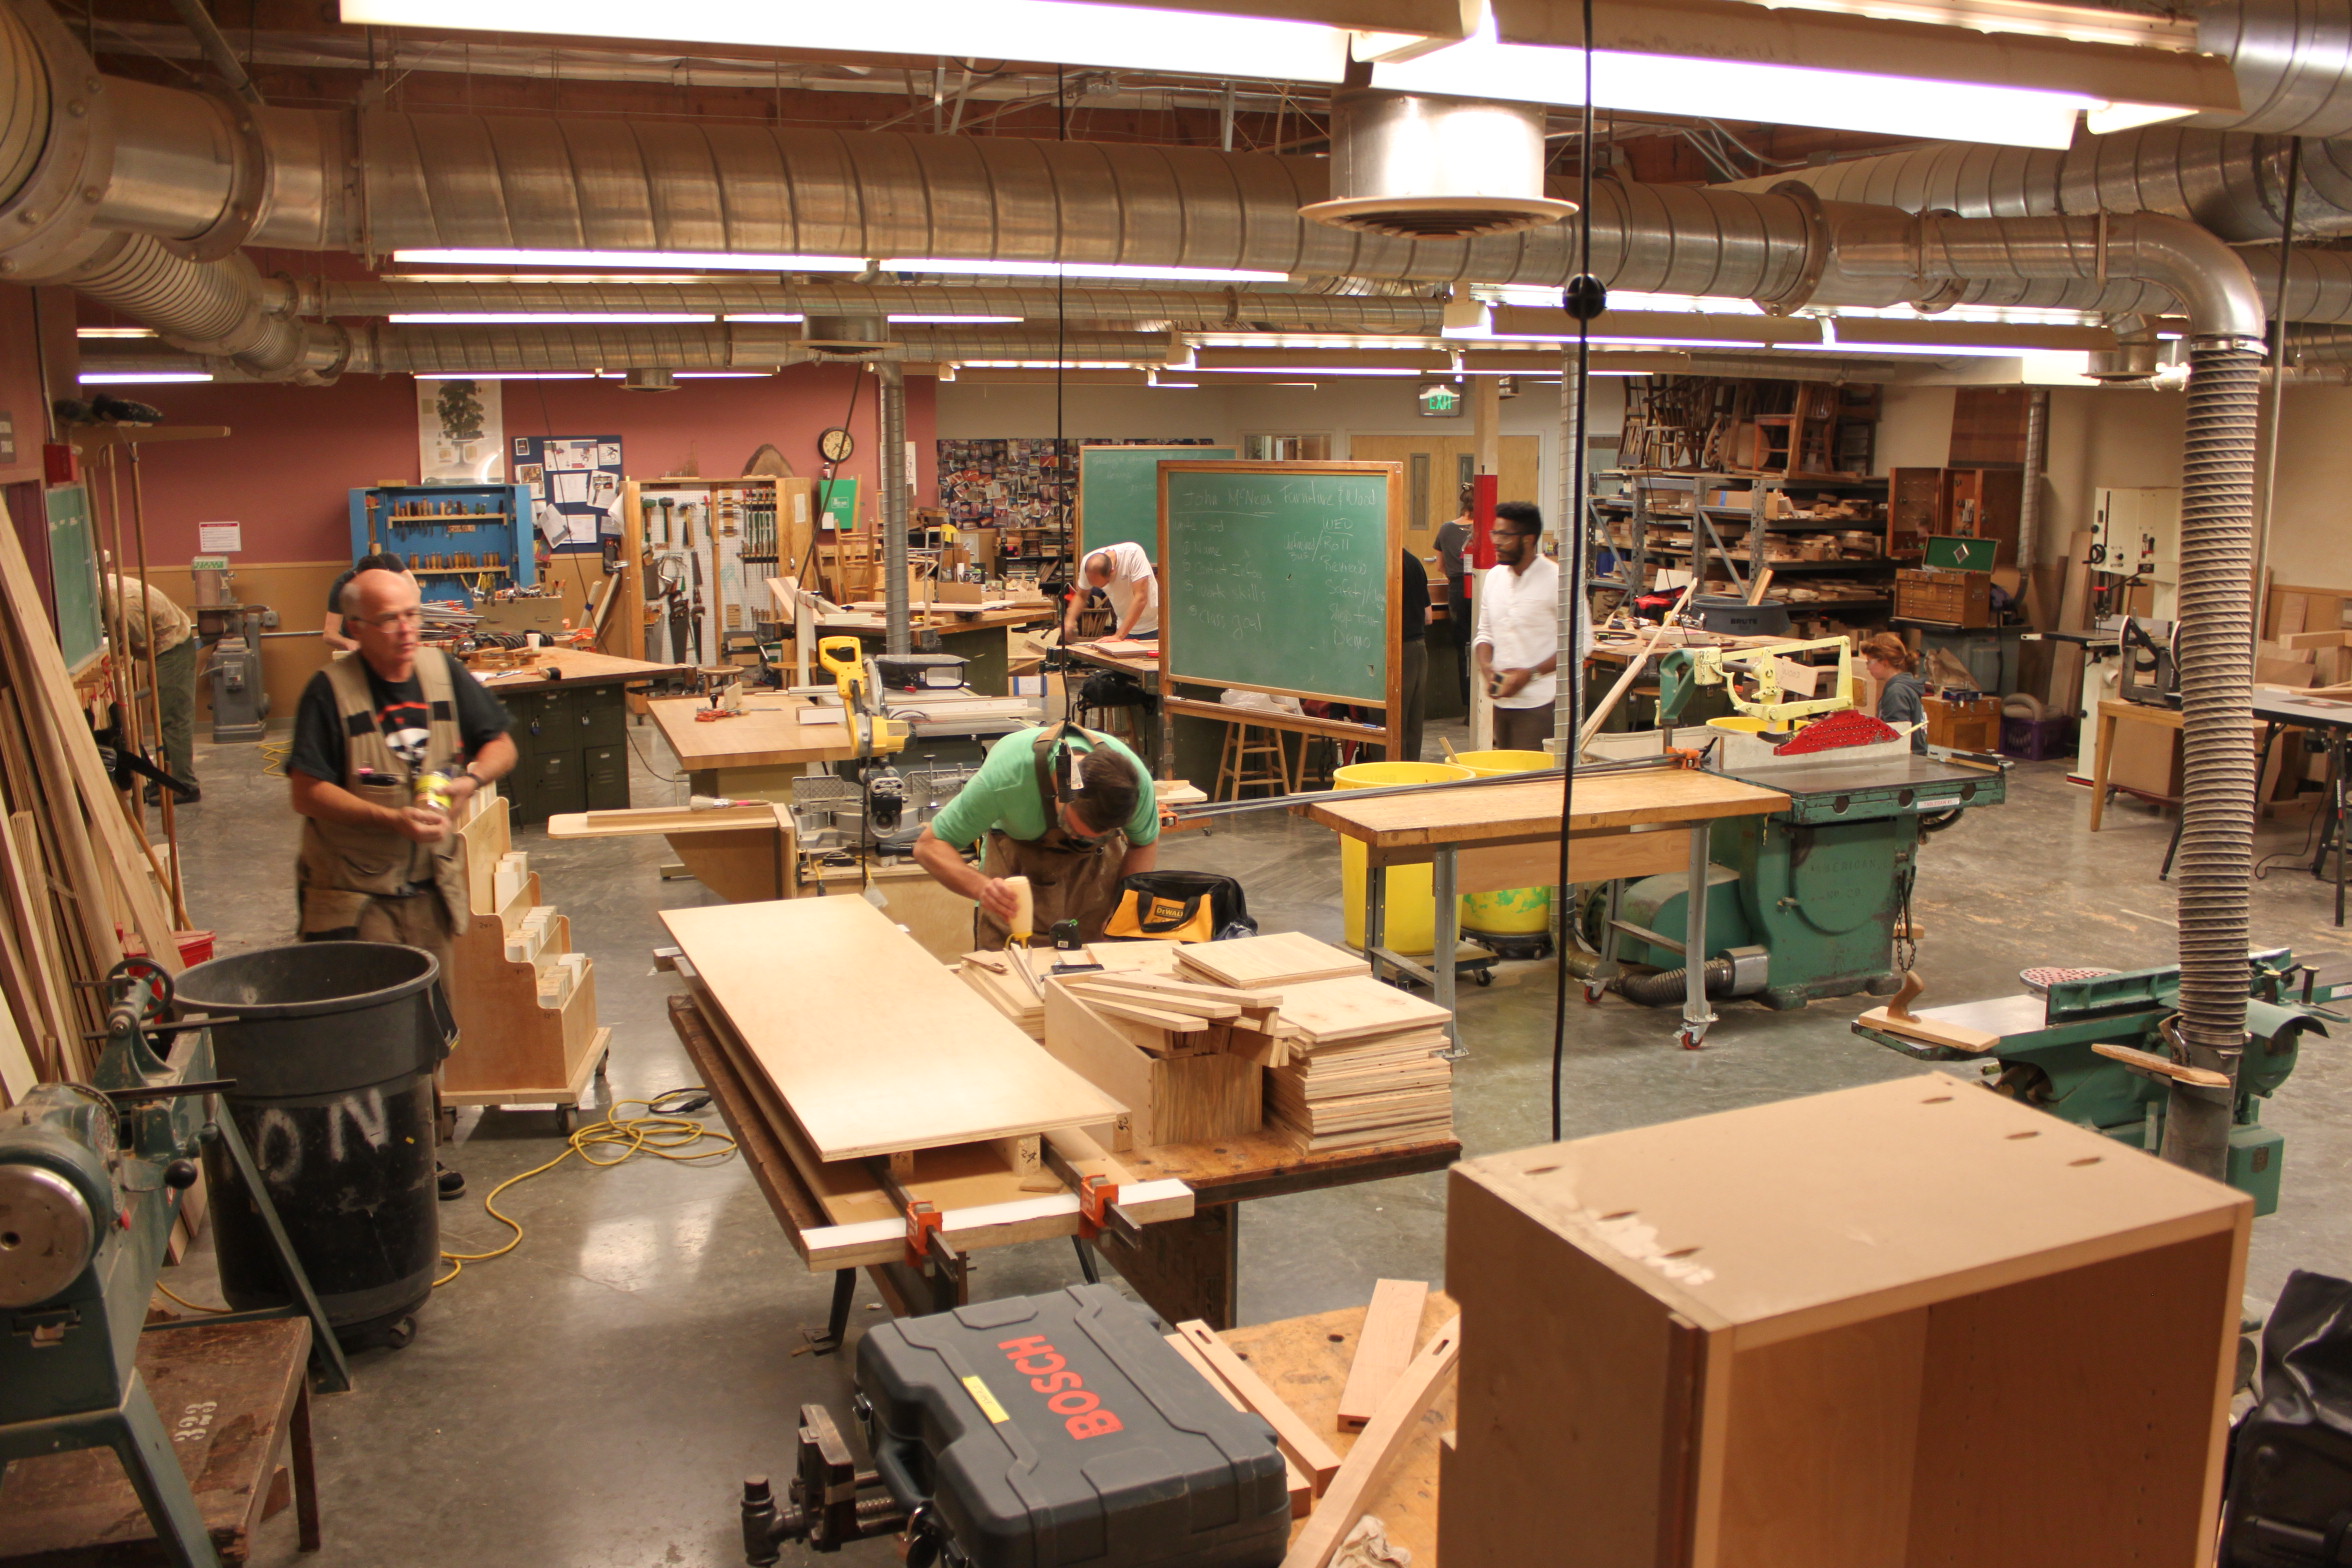 Every Monday and Wednesday in Fall of 2017 the advanced carpentry class is bustling with projects from City College students on the second floor of the Evans Campus. O’Mahoney is one of them, though not present in this photograph. Photo taken by Bethaney Lee on Nov. 6, 2017. 